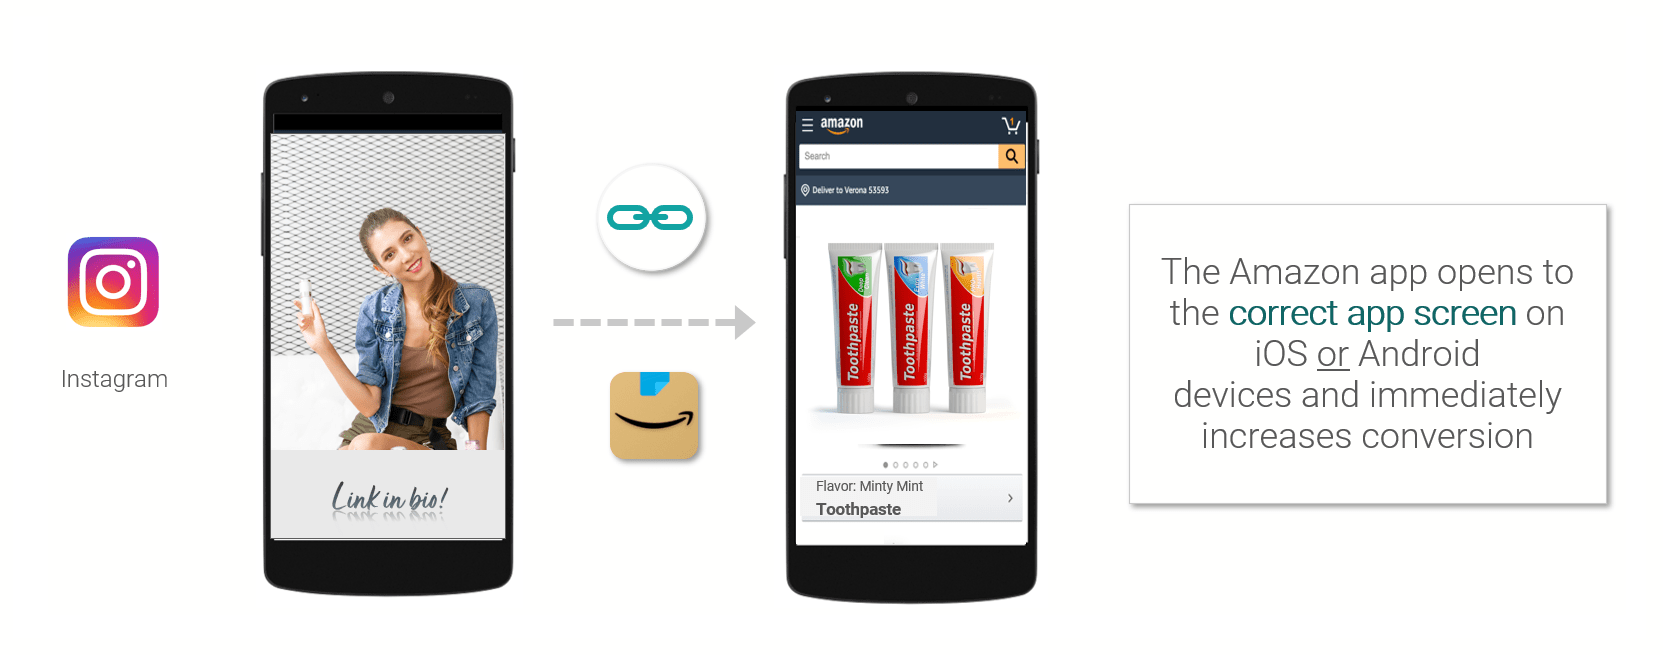 The Amazon app opens to the correct app screen on iOS or Android devices and immediatley increases conversion